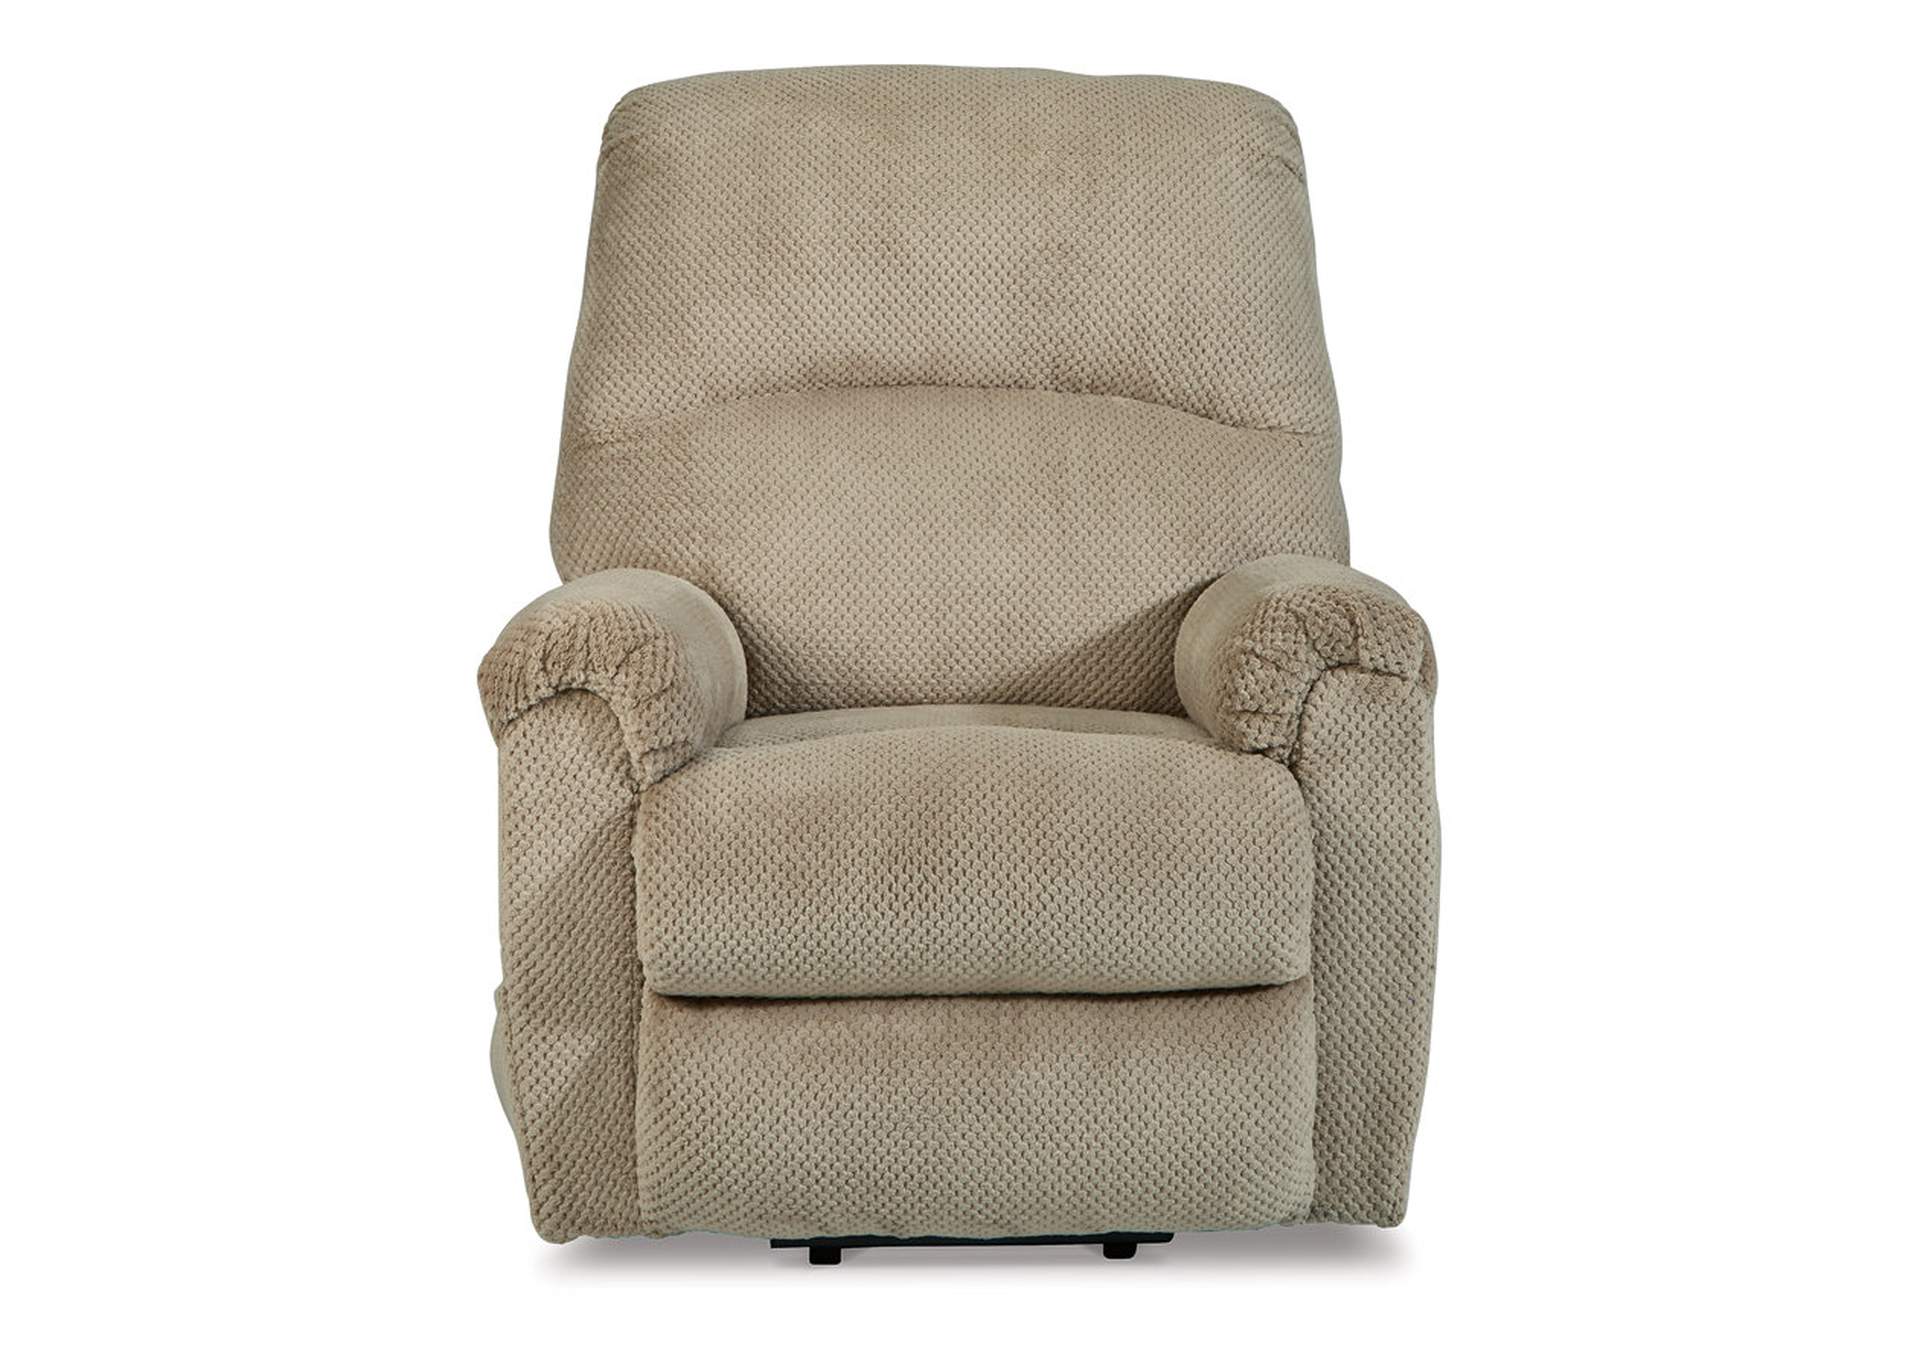 Shadowboxer Power Lift Recliner,Signature Design By Ashley